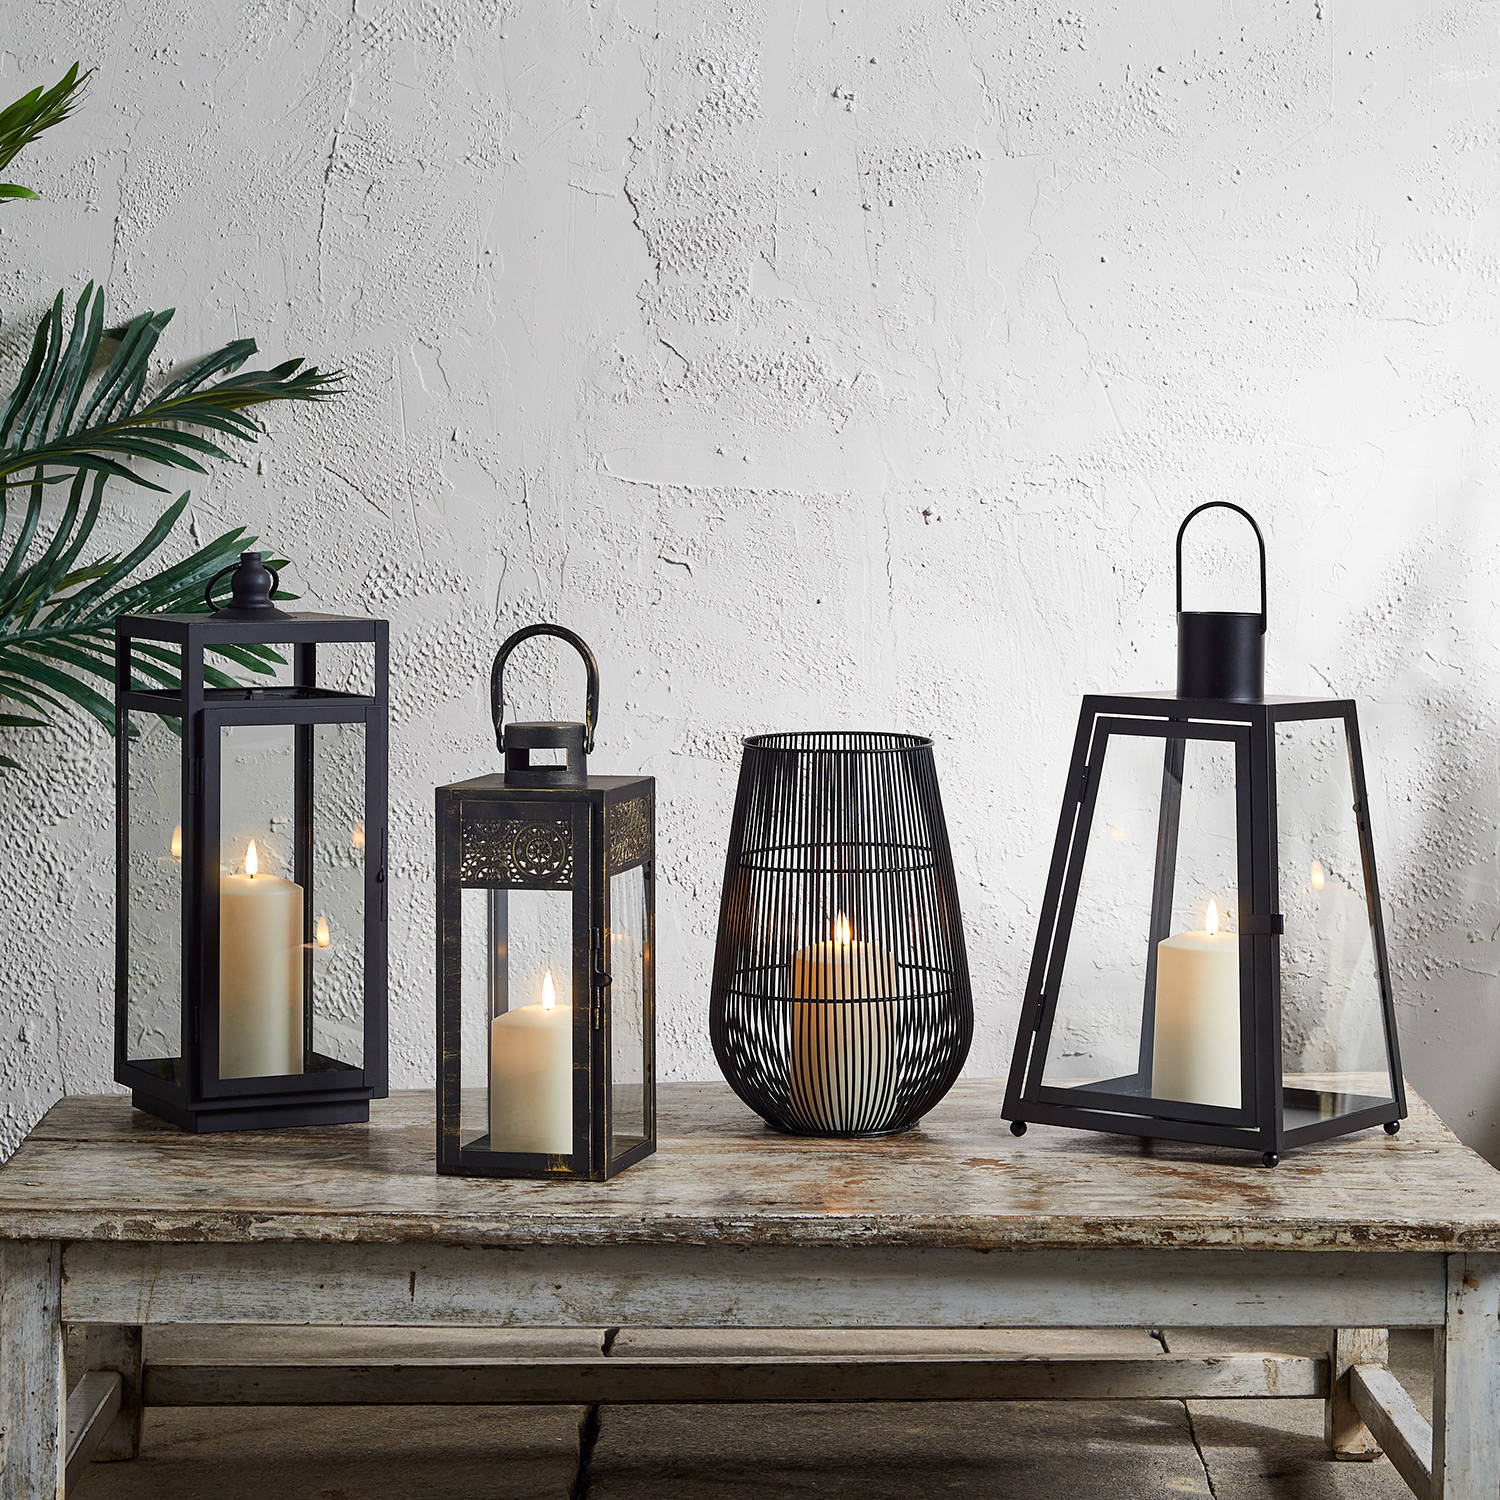 A selection of black garden lanterns in different styles with LED candles inside, sat on a wooden table